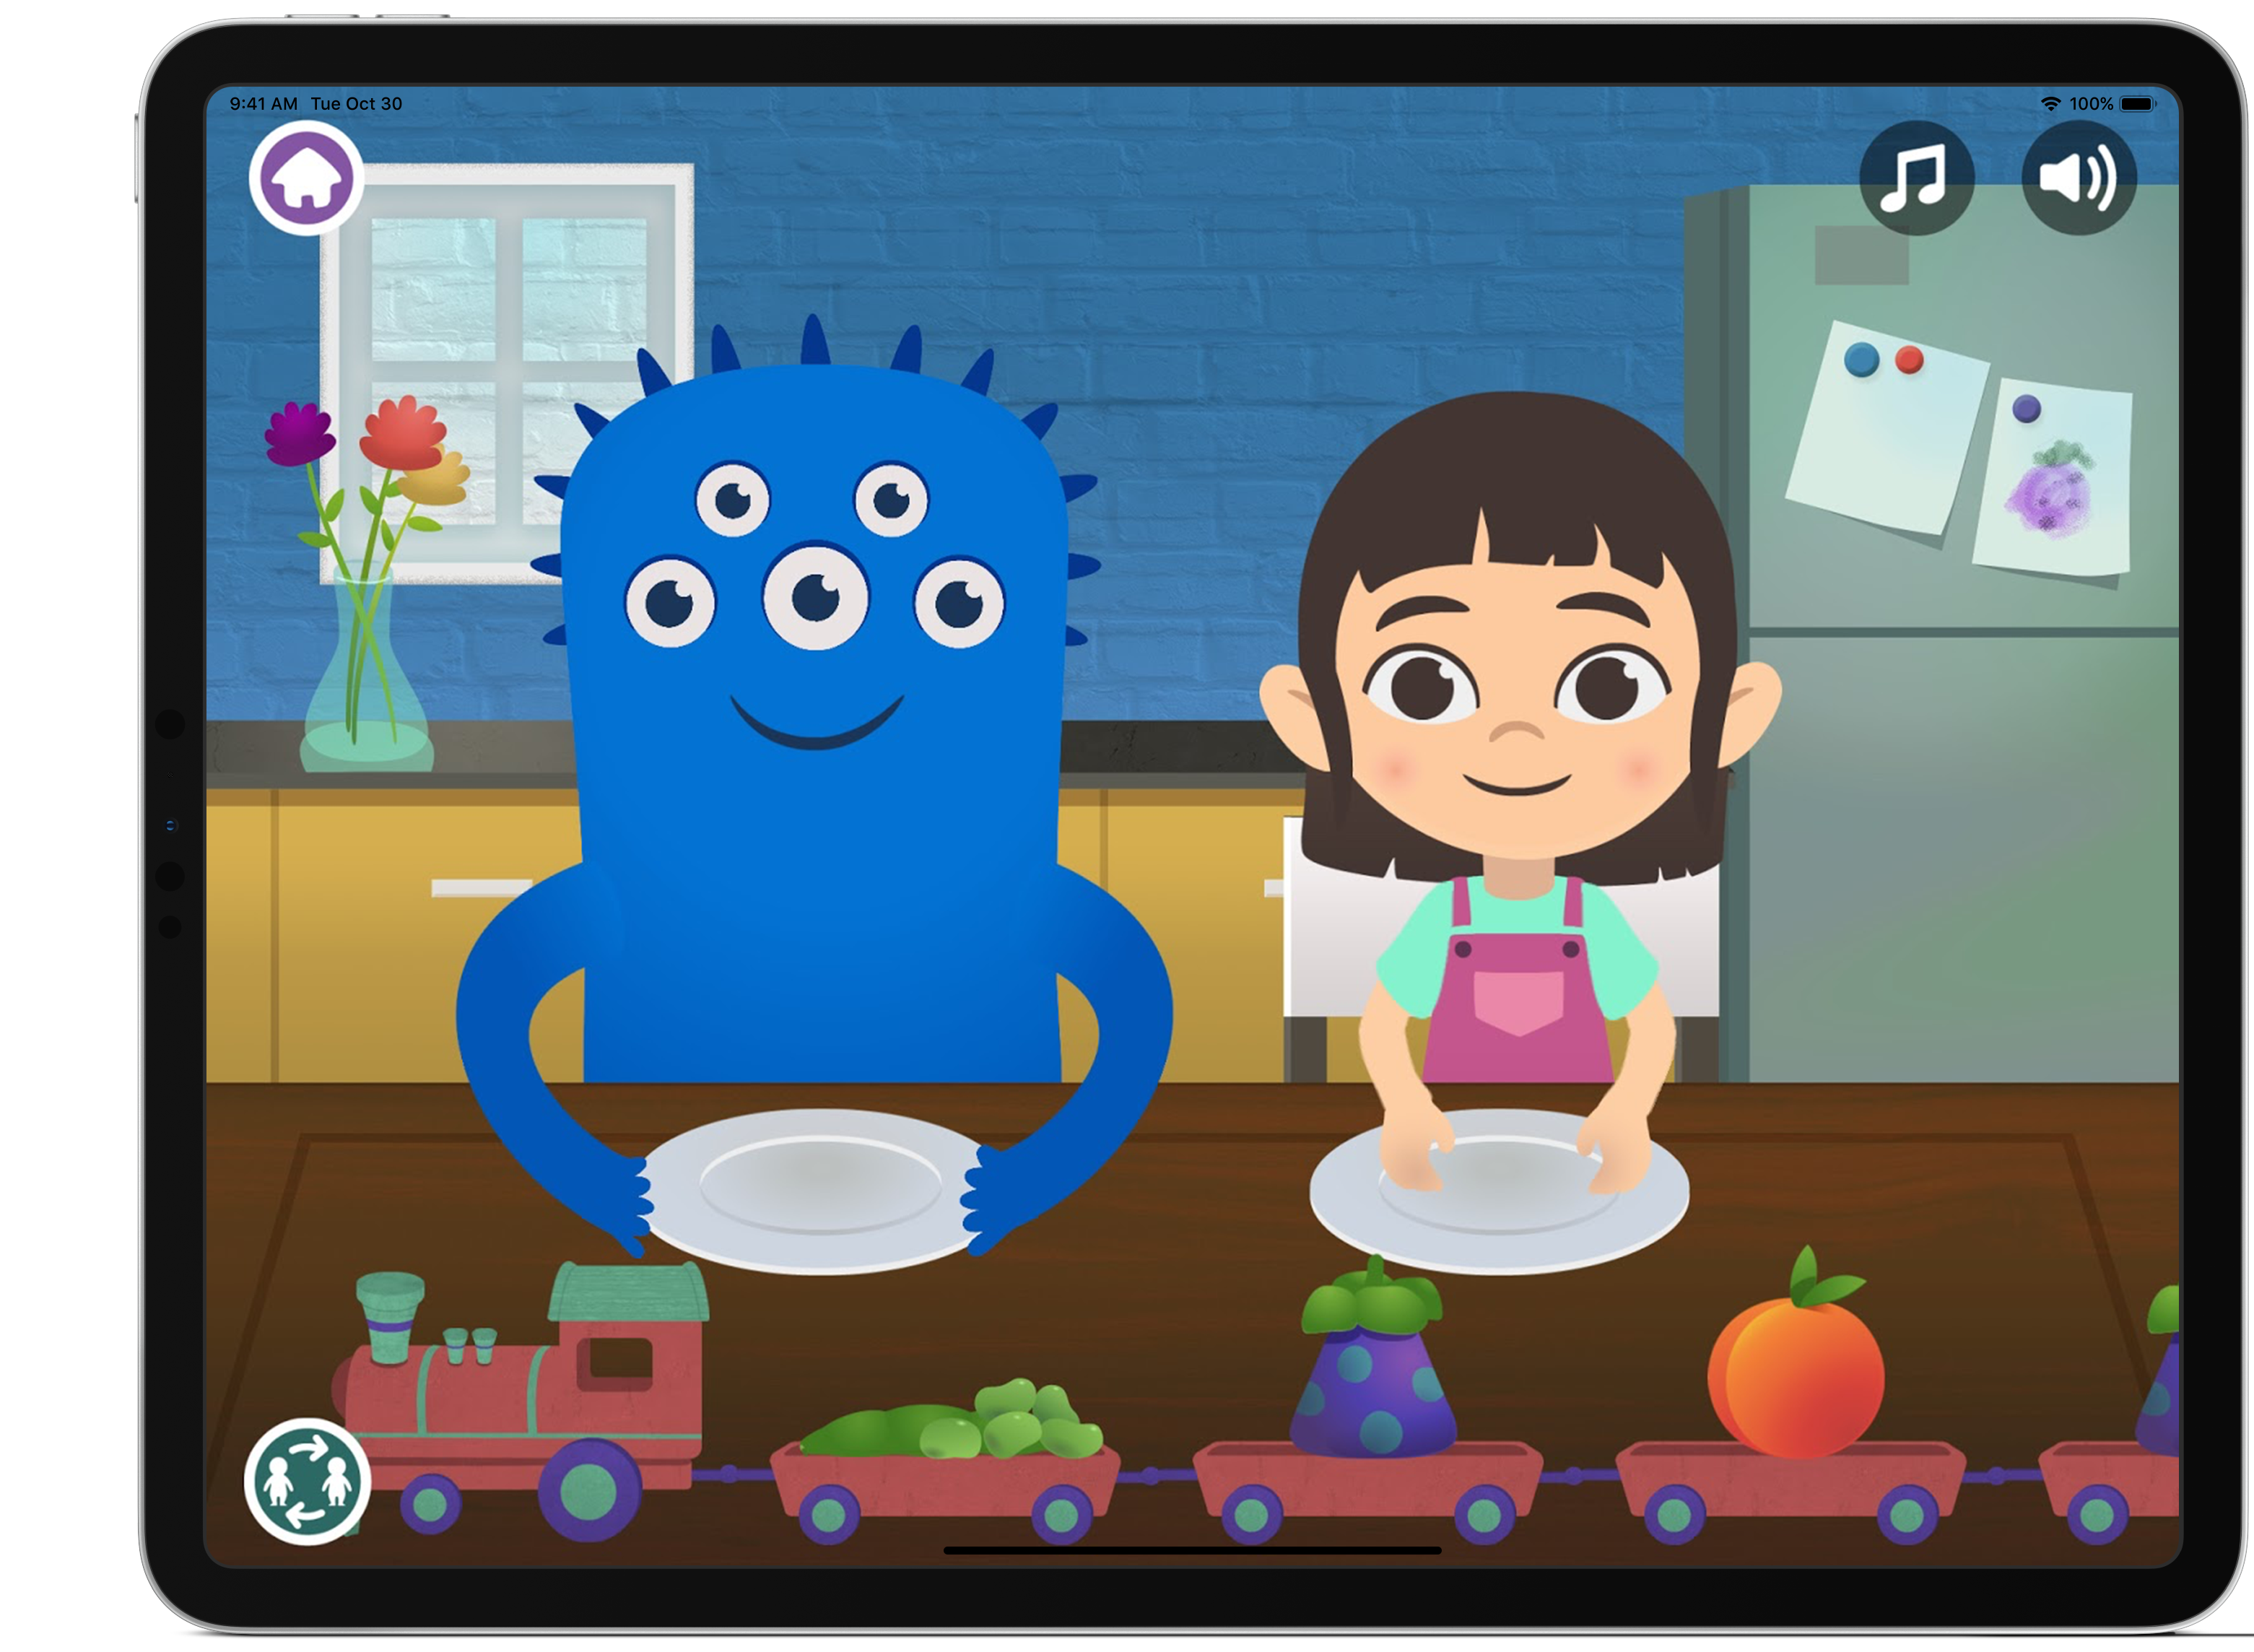 Tasting Party Express - two characters, happy girl and blue creature sitting in kitchen with plate and different kinds of fruits 